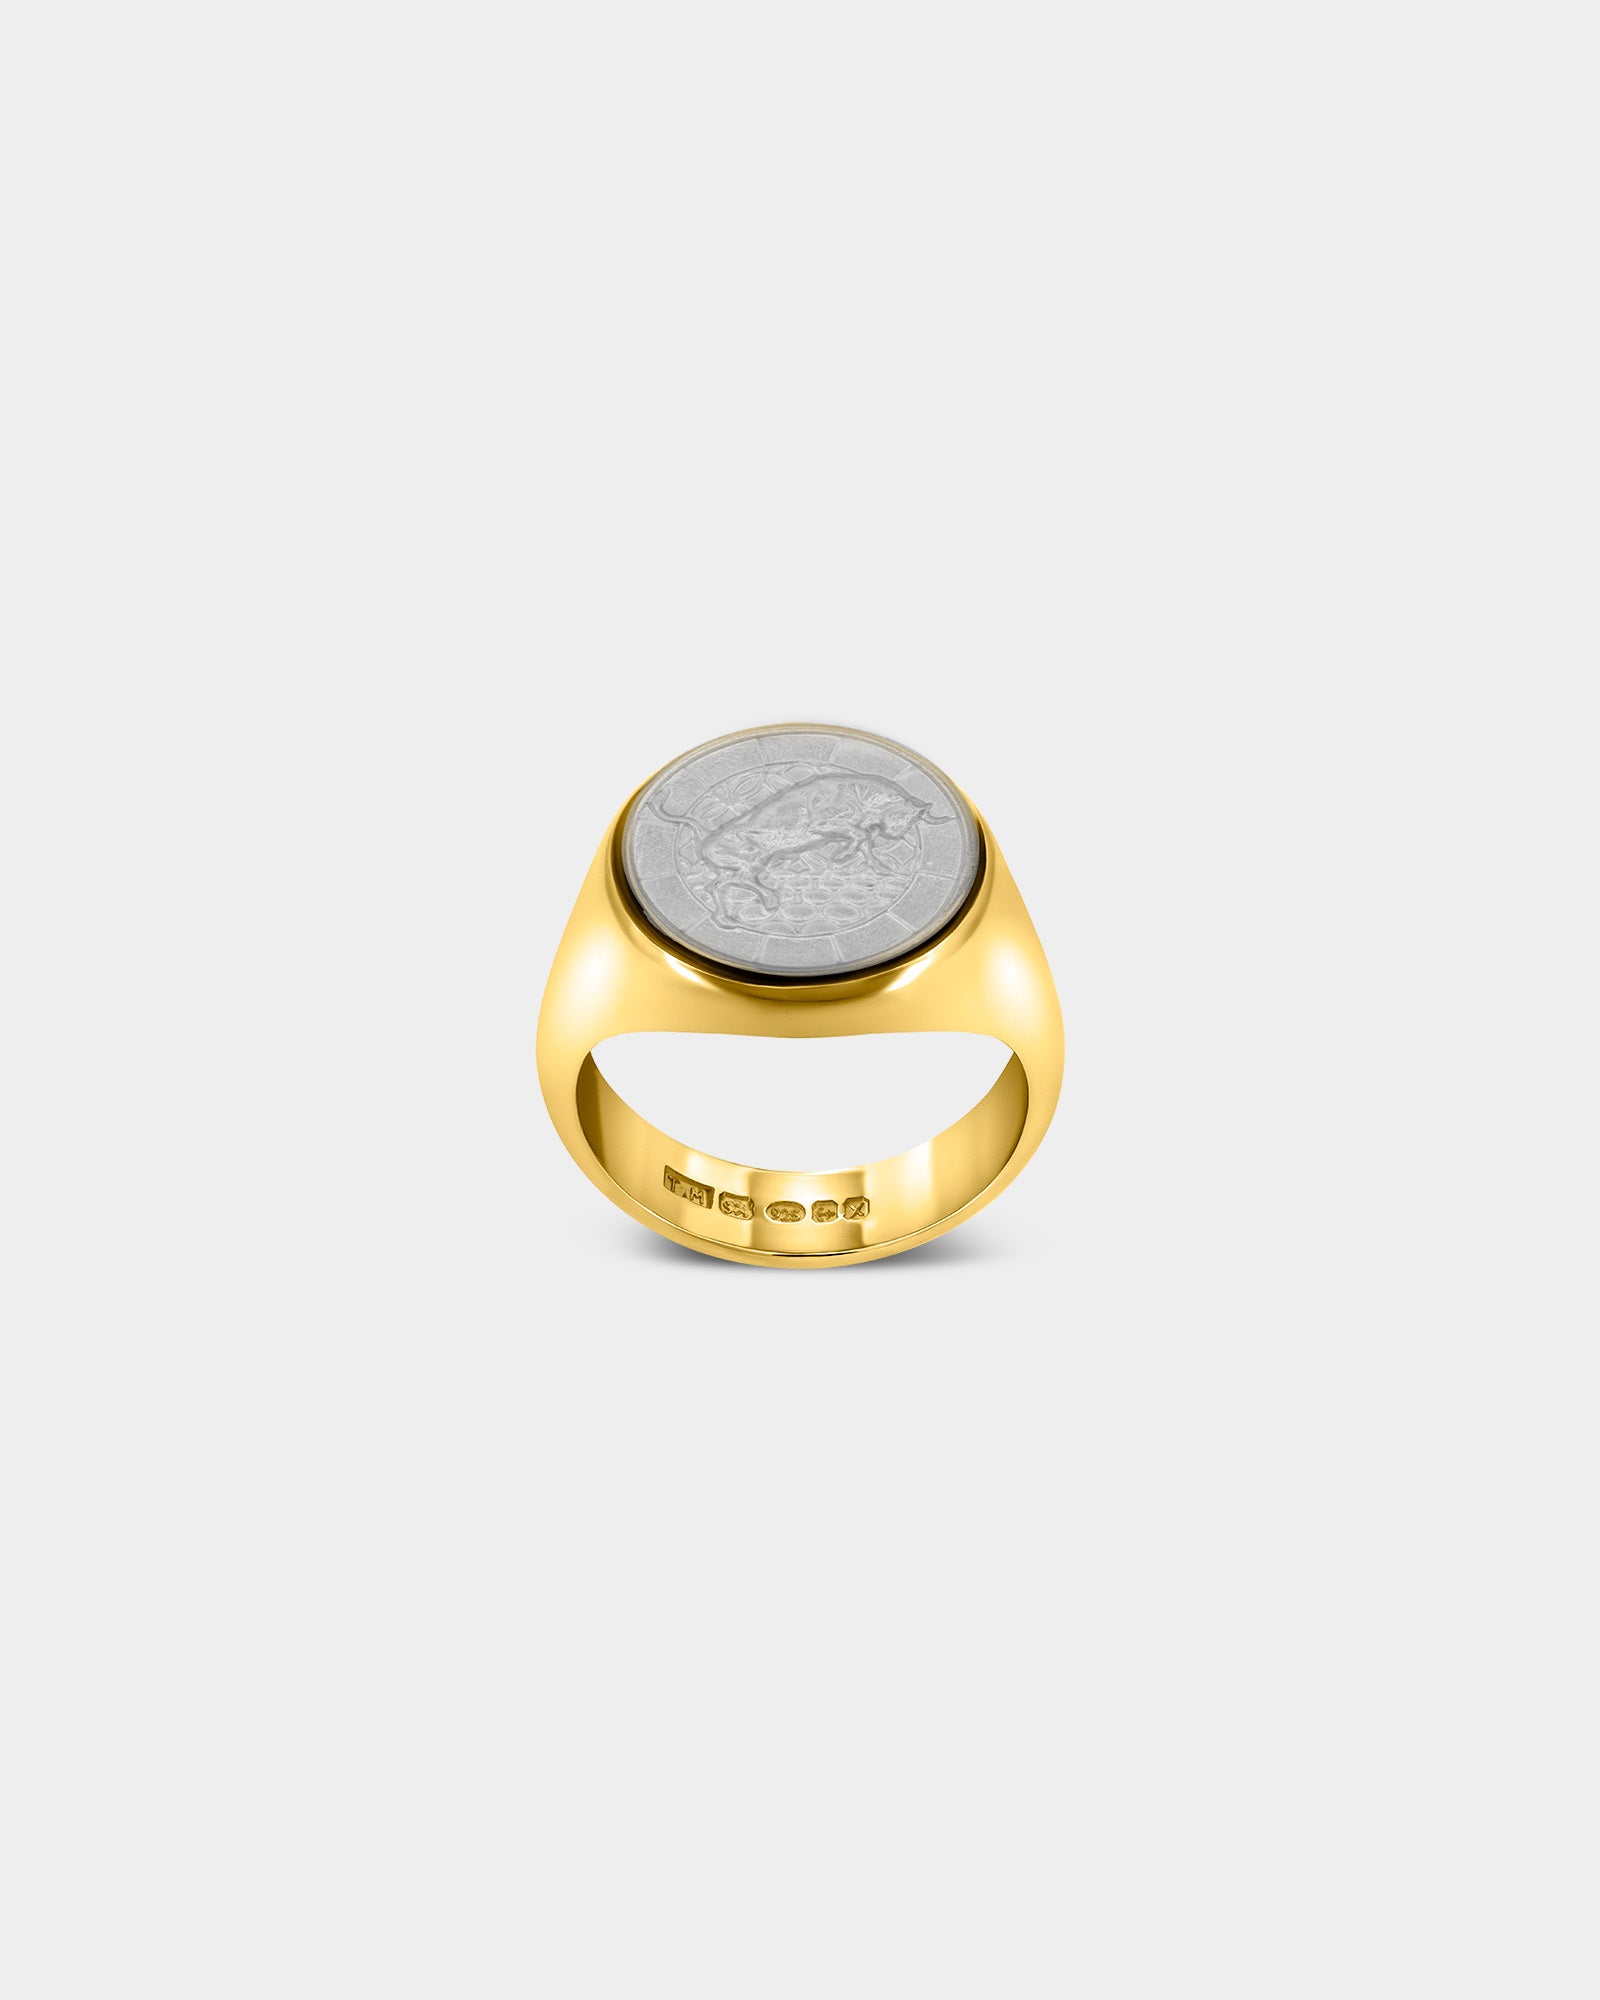 The Bull Large Signet Ring in 9k Yellow Gold / Sterling Silver by Wilson Grant